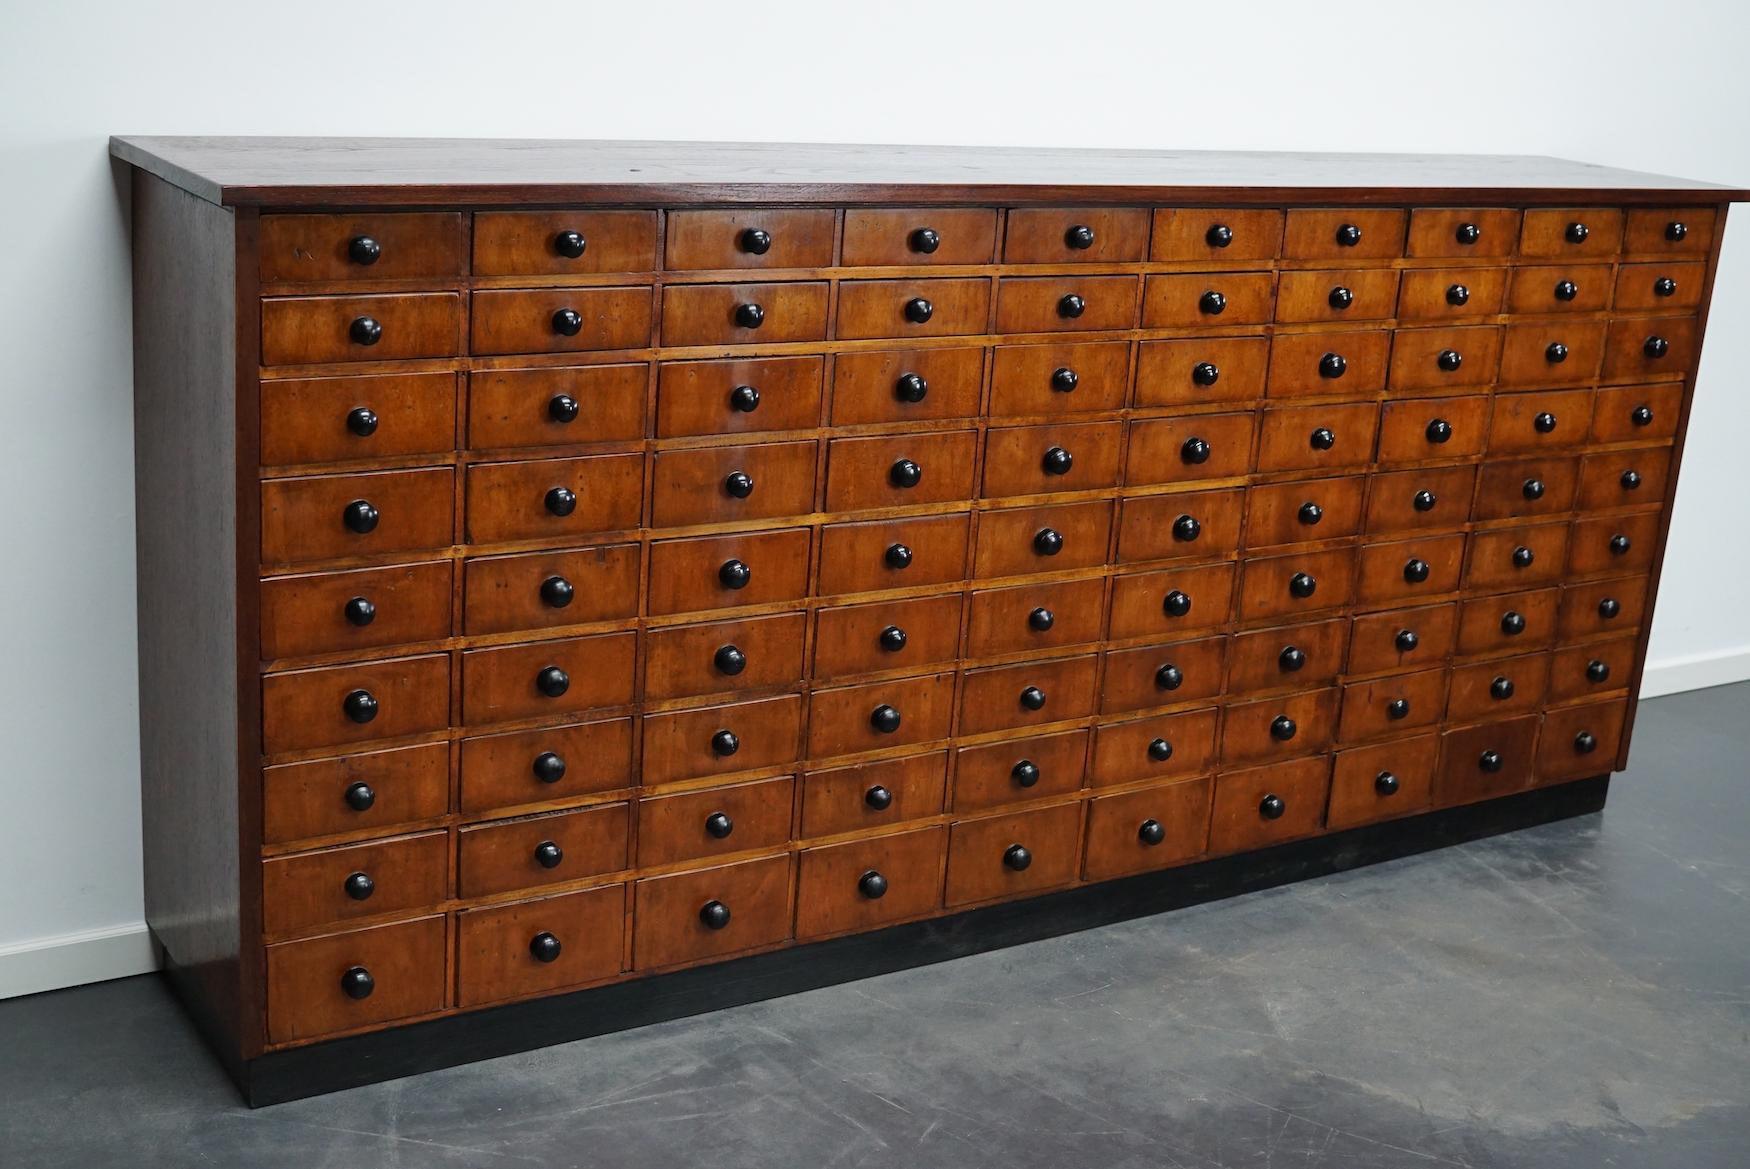 This apothecary cabinet was made circa 1950s in Germany. It features 90 drawers with black knobs. The interior dimensions of the drawers are: D x W x H 36.5 x 19 x 6, 7.5 and 11 cm, some of the drawers have dividers and some don't.
Details.
 